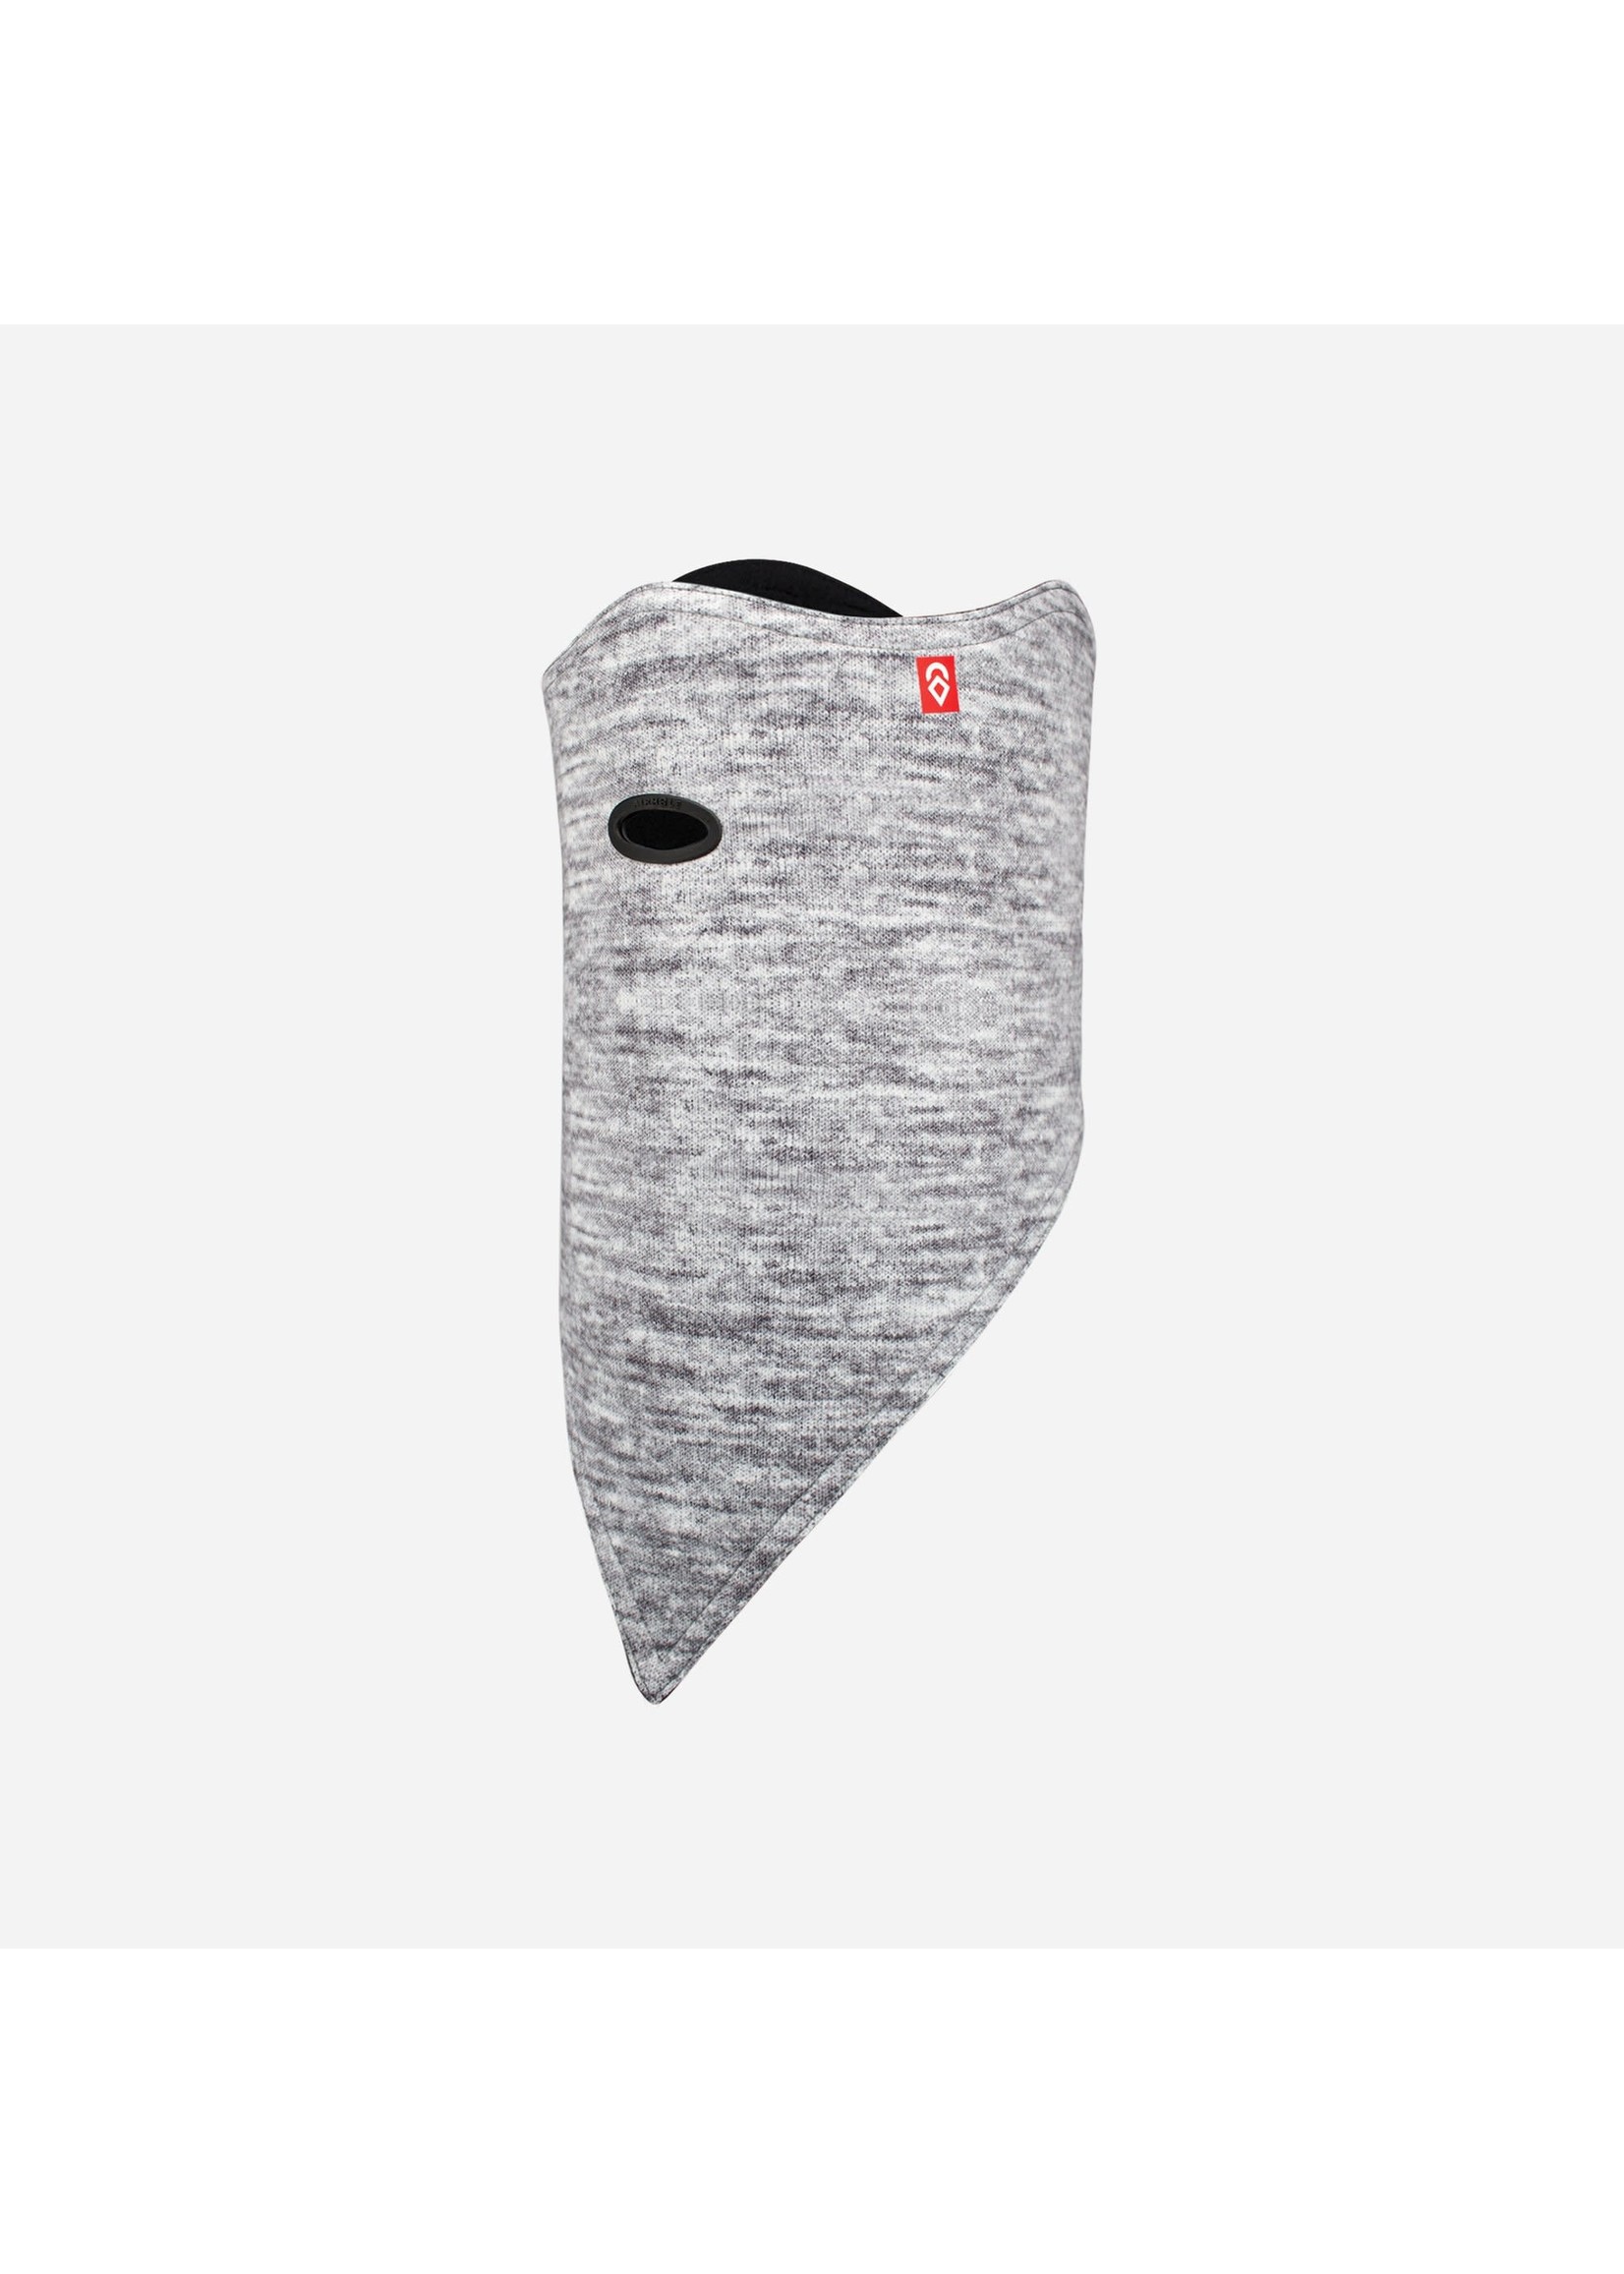 Airhole Airhole Face Mask Std. 2-Layer